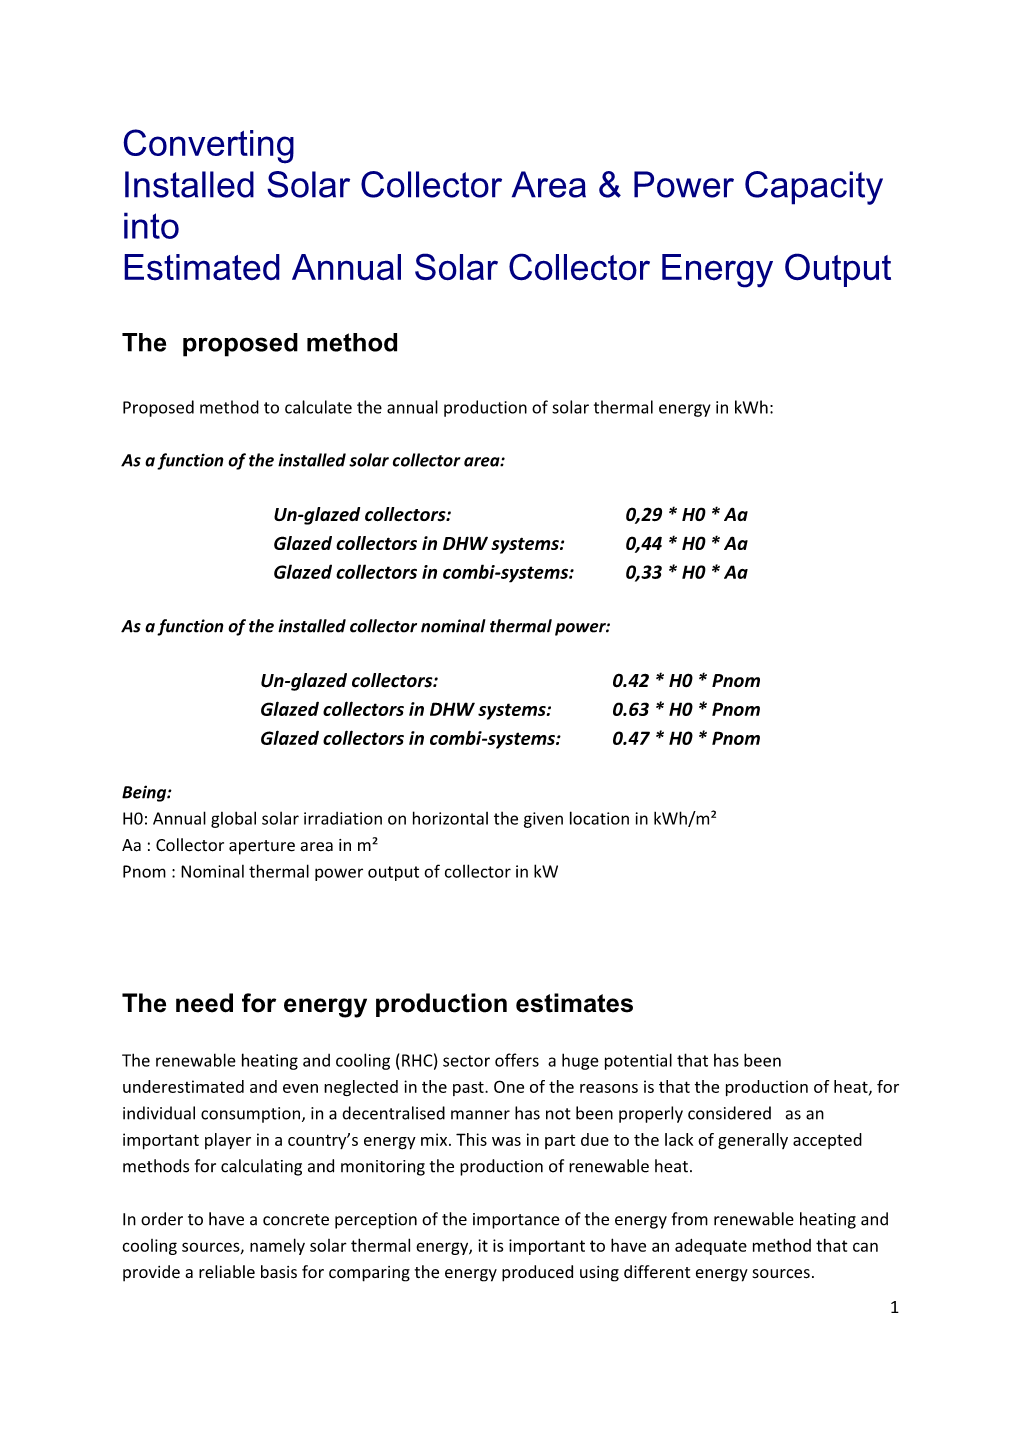 Converting Installed Solar Collector Area & Power Capacity Into